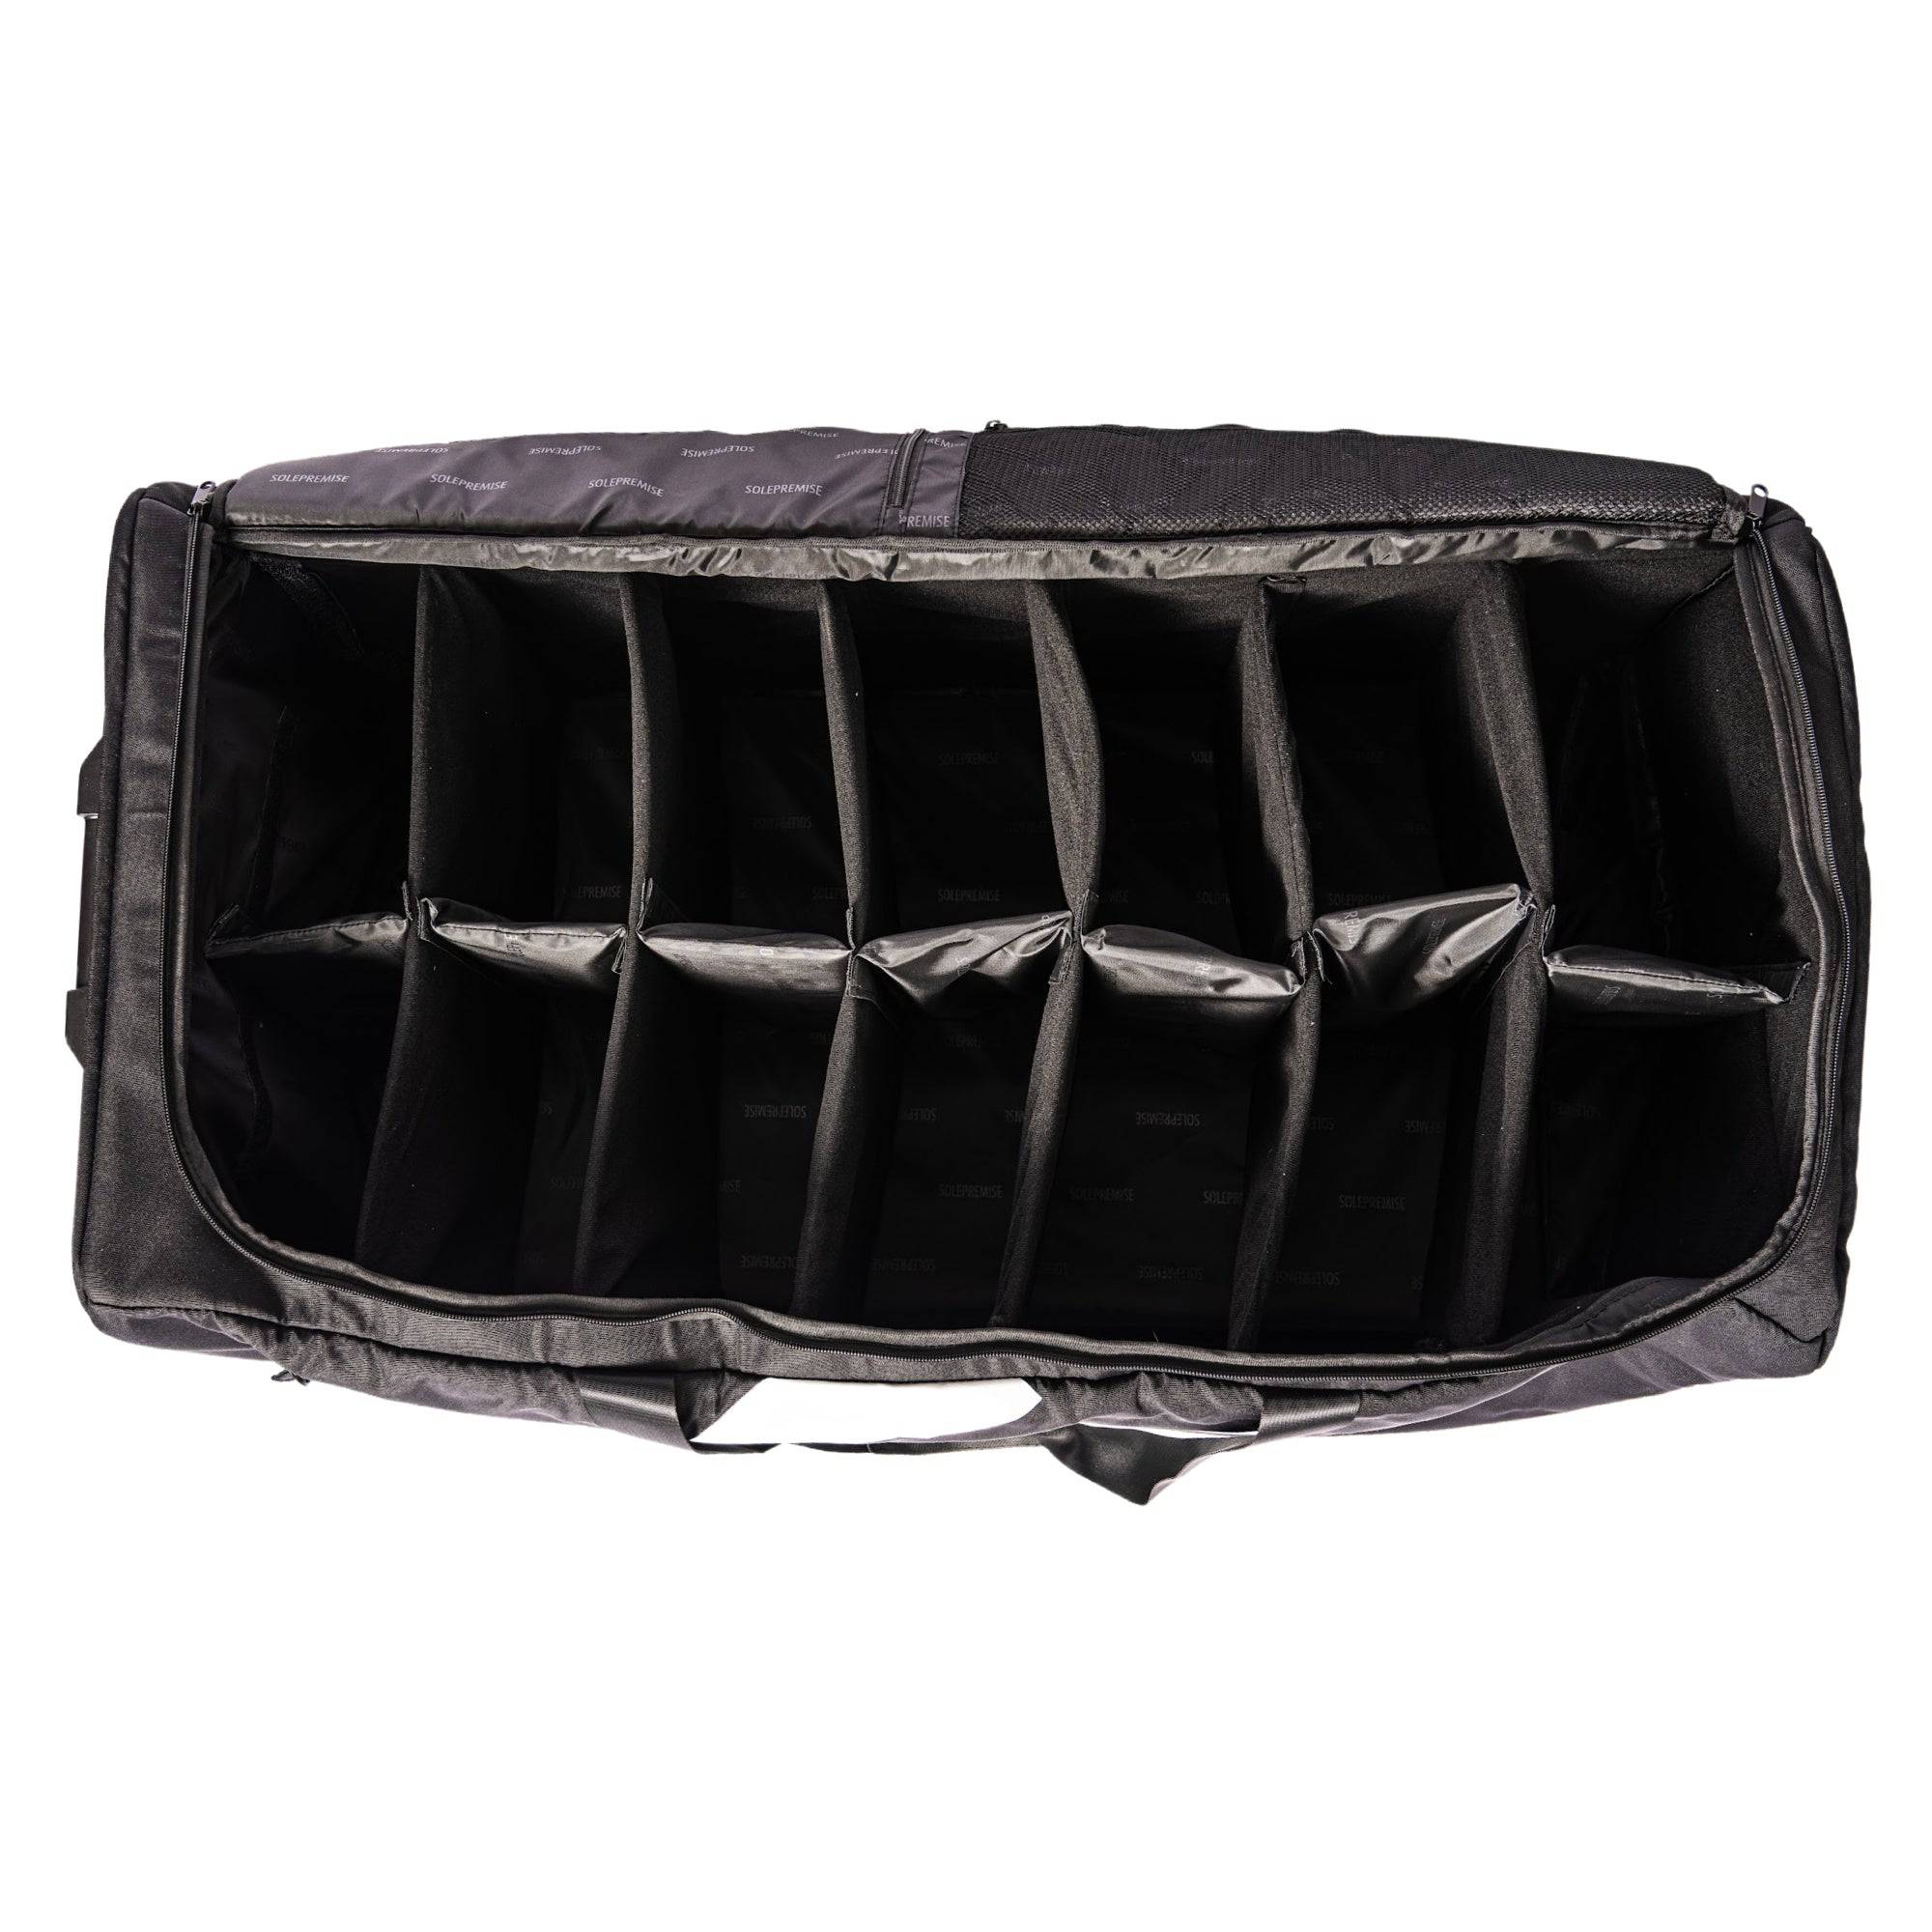 Ultimate Equipment Carrier With Wheels (Holds 18-20 Pairs of Shoes) - Sole Premise